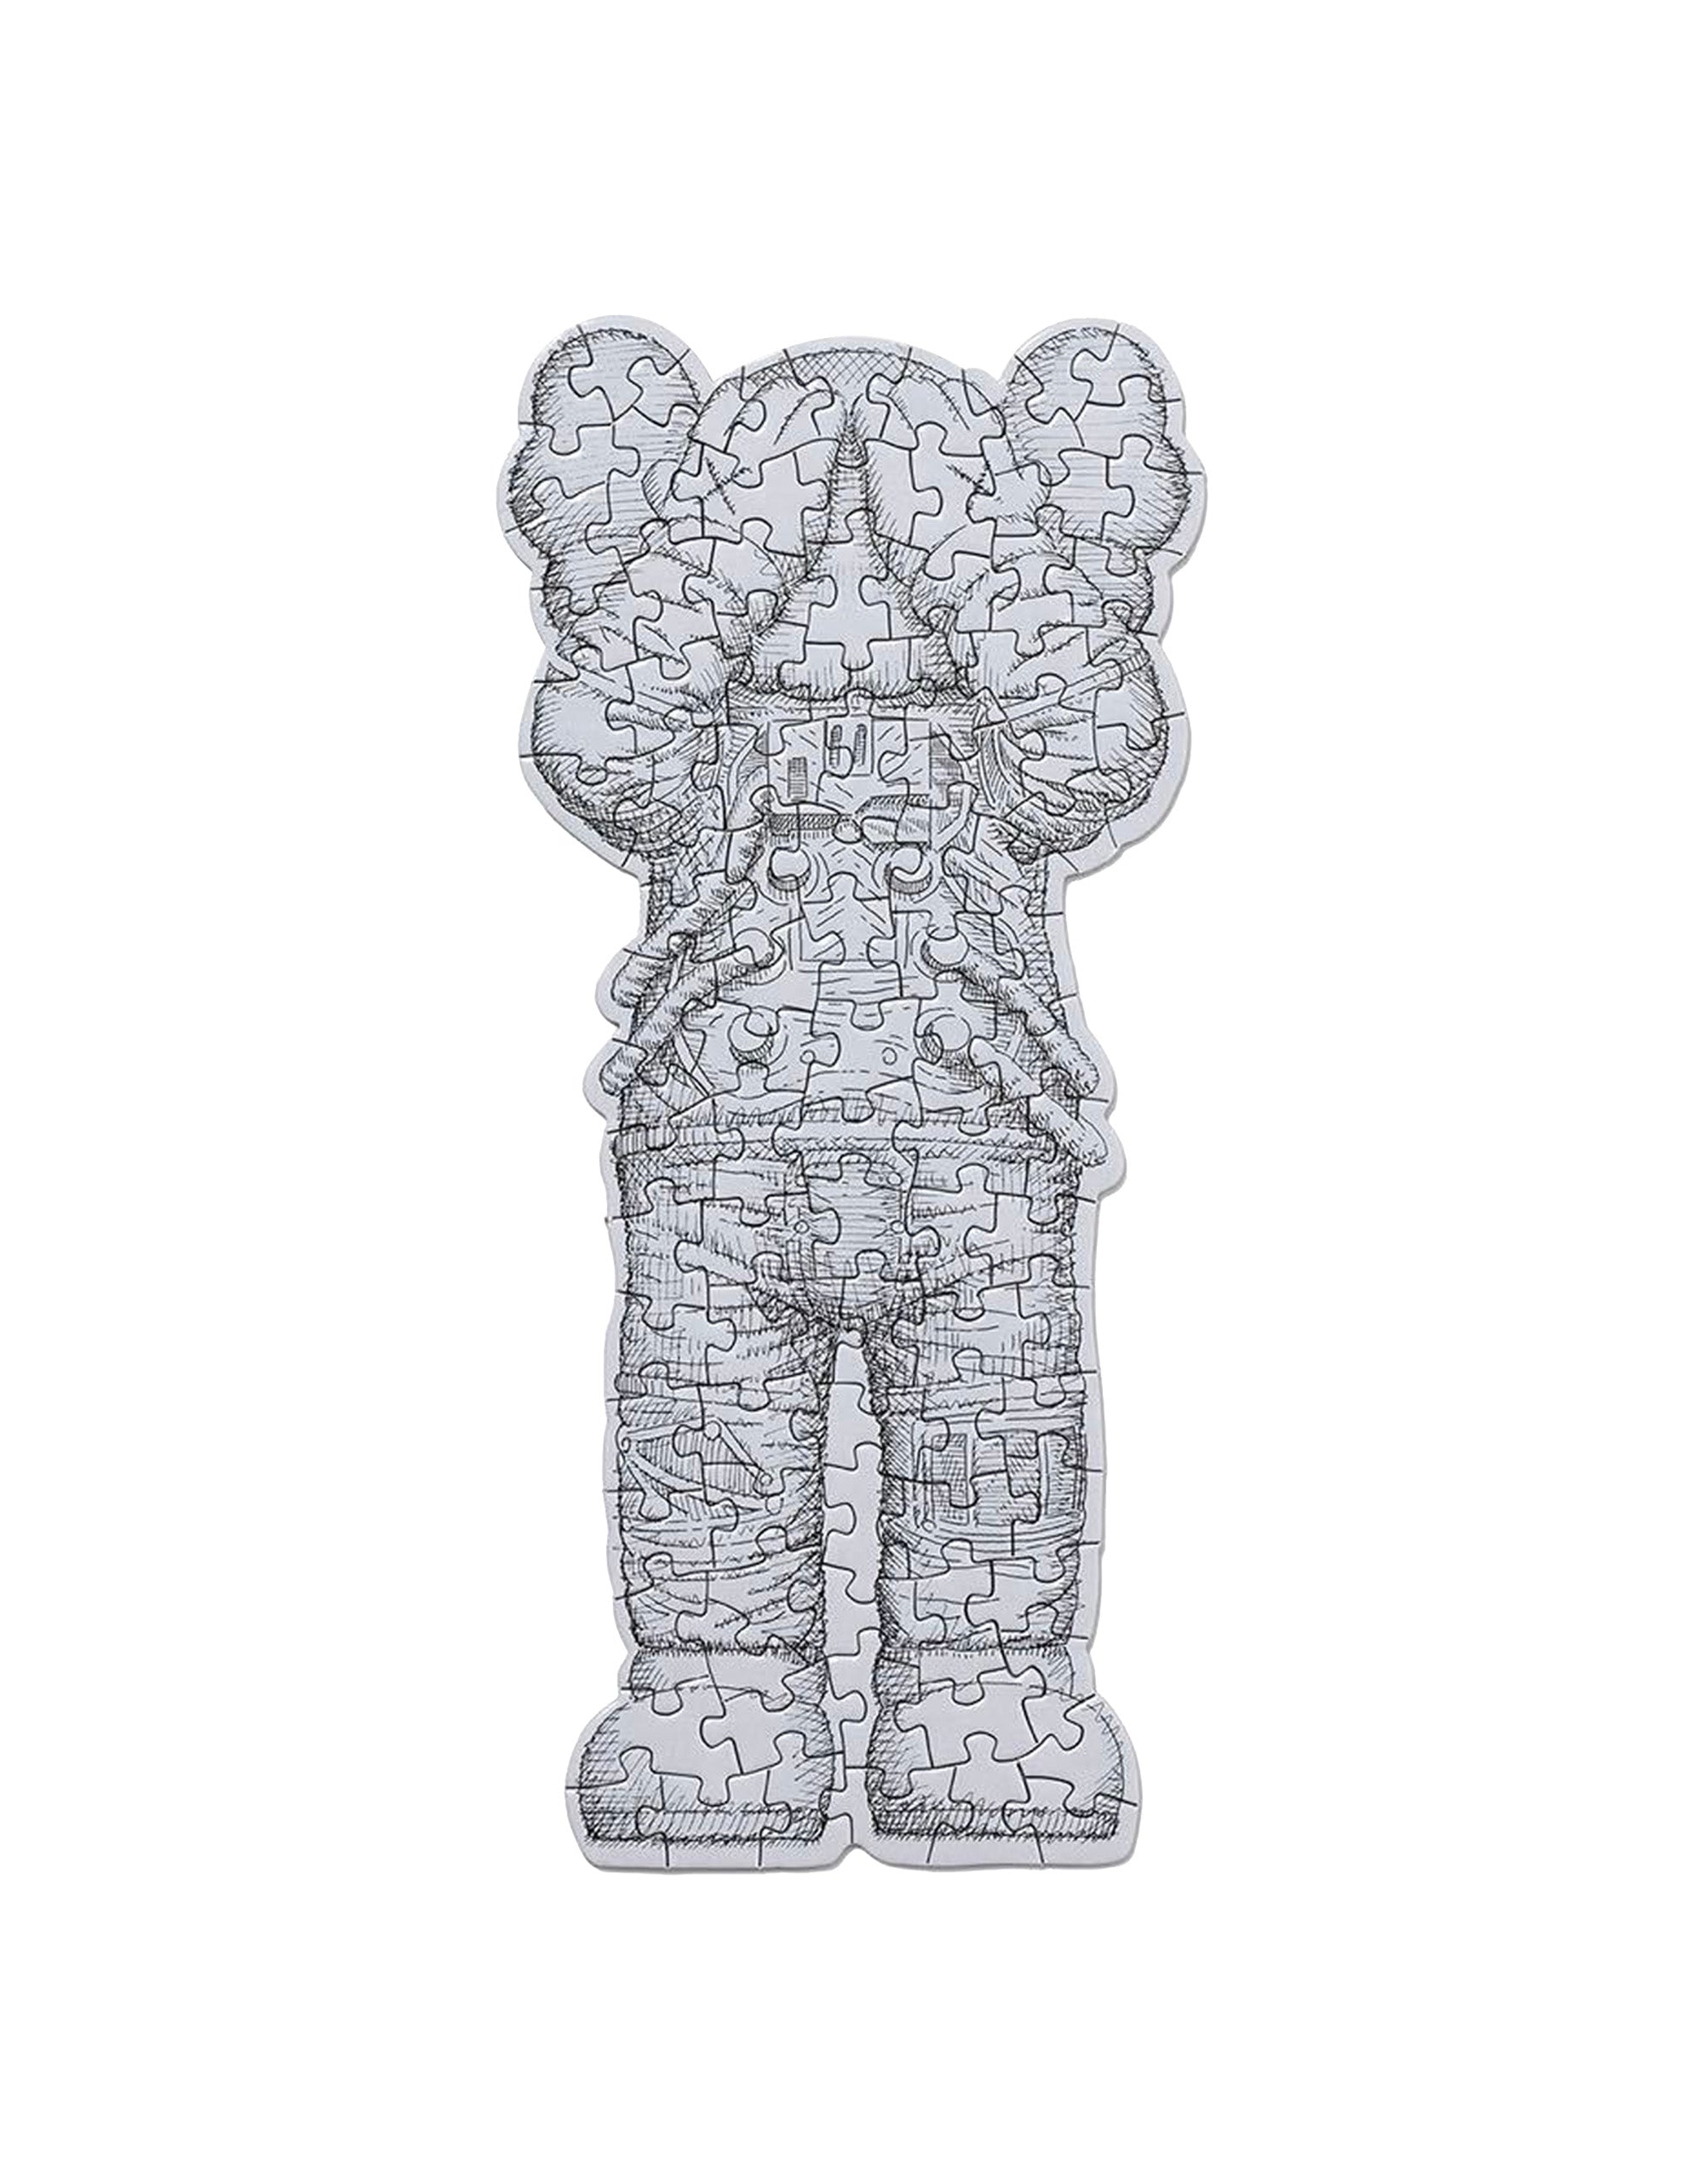 KAWS - Tokyo First Space Holiday Puzzle 100 Pieces